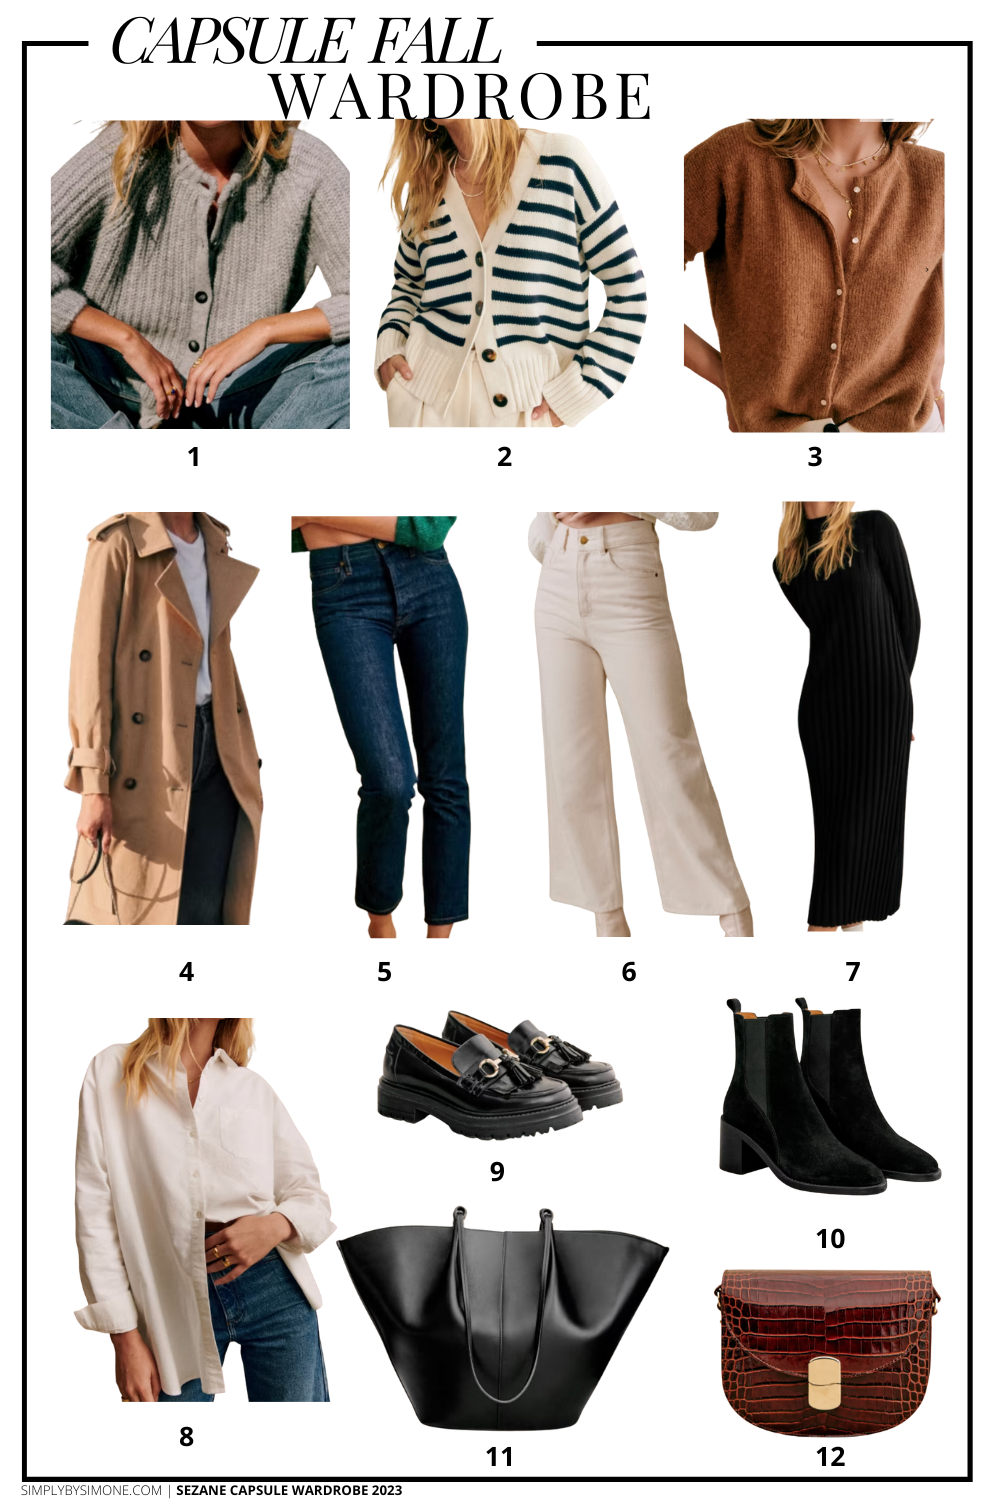 Affordable Sezane Fall Capsule Wardrobe | 12 Pieces, 48 Outfits | How to Build a Capsule Wardrobe | Sezane Fall Clothes | Outfit Inspiration | 48 Fall Weather Outfit Ideas | Fall Vacation Packing Guide | Sezane Fall Capsule Wardrobe - What To Wear This Fall 2023, Parisian Outfit Ideas | Items 1-12 | Simply by Simone